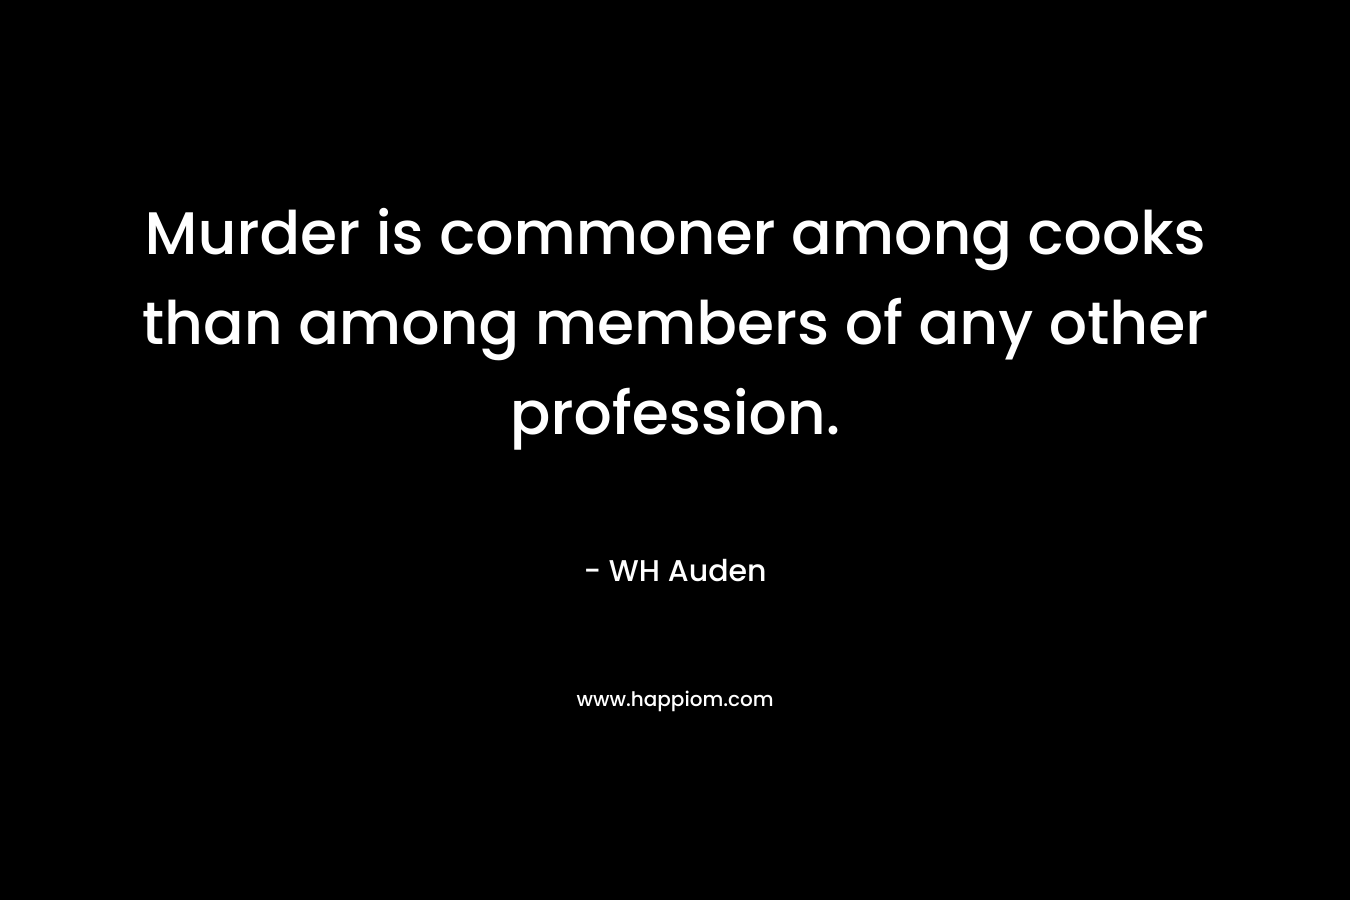 Murder is commoner among cooks than among members of any other profession.